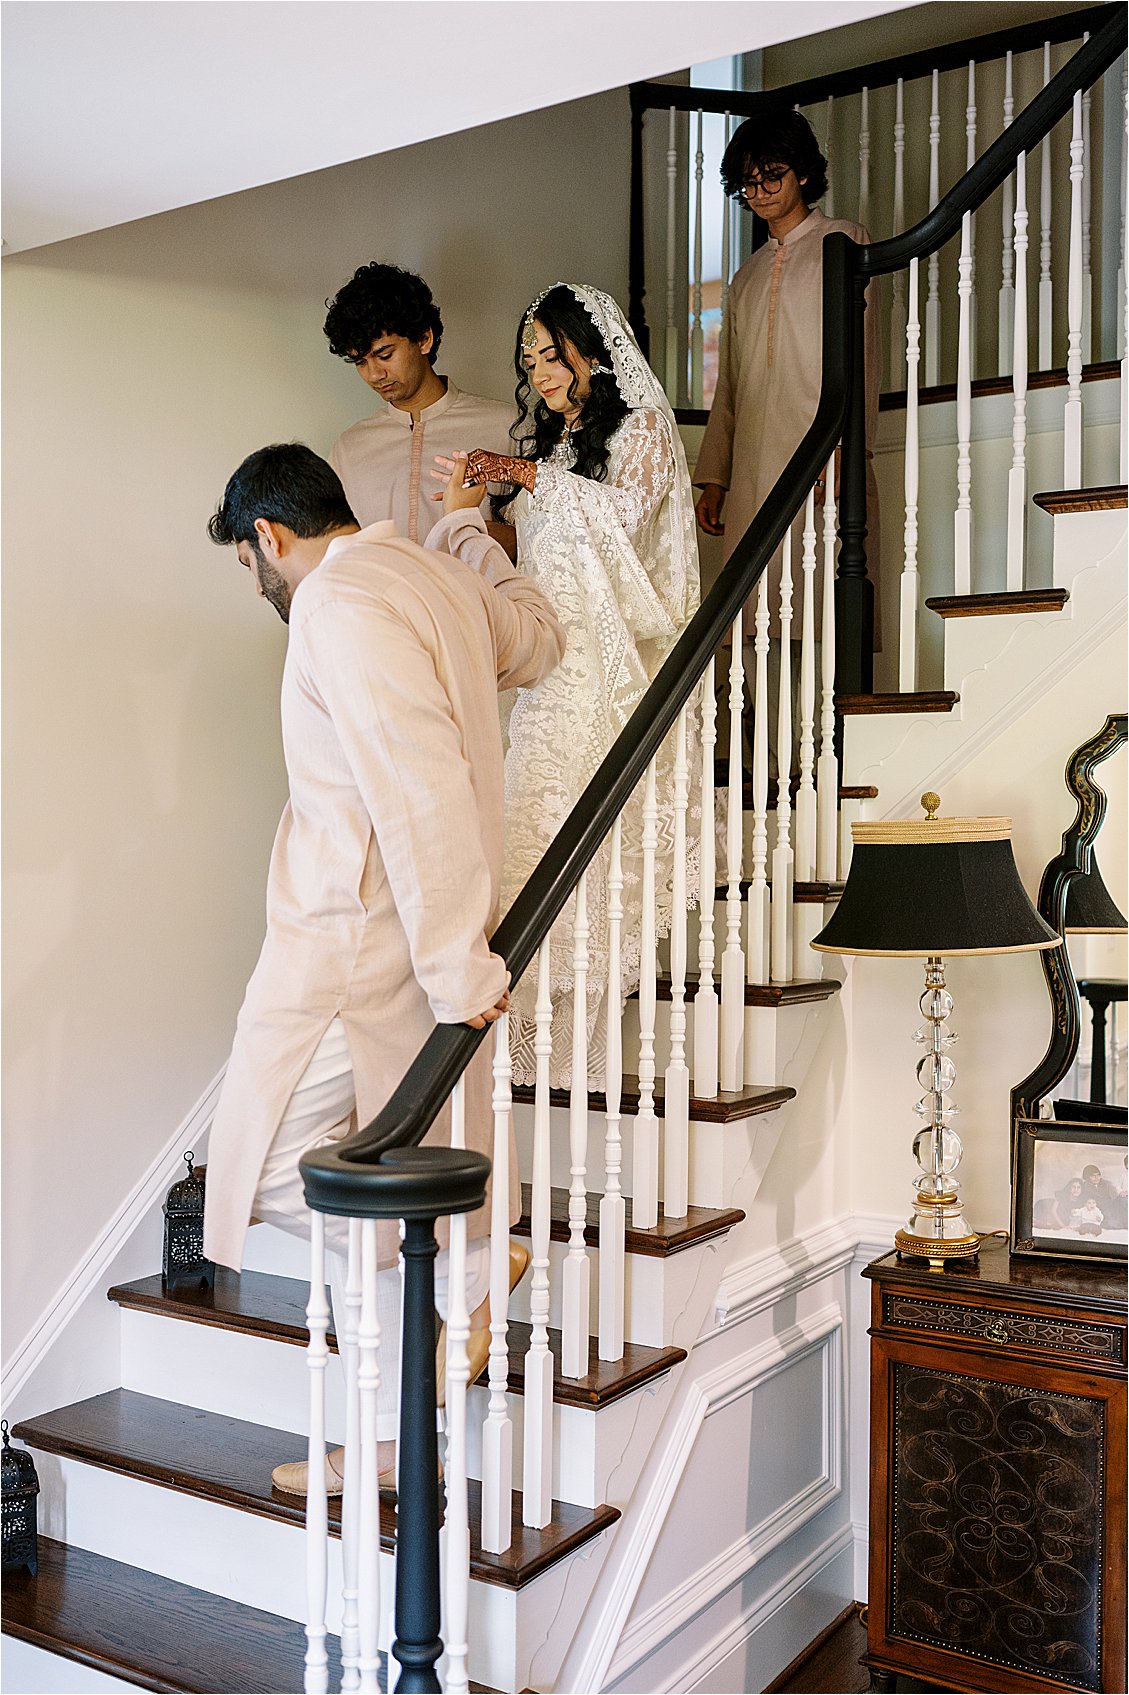 Bride walks down the stairs at her Nikkah ceremony at home